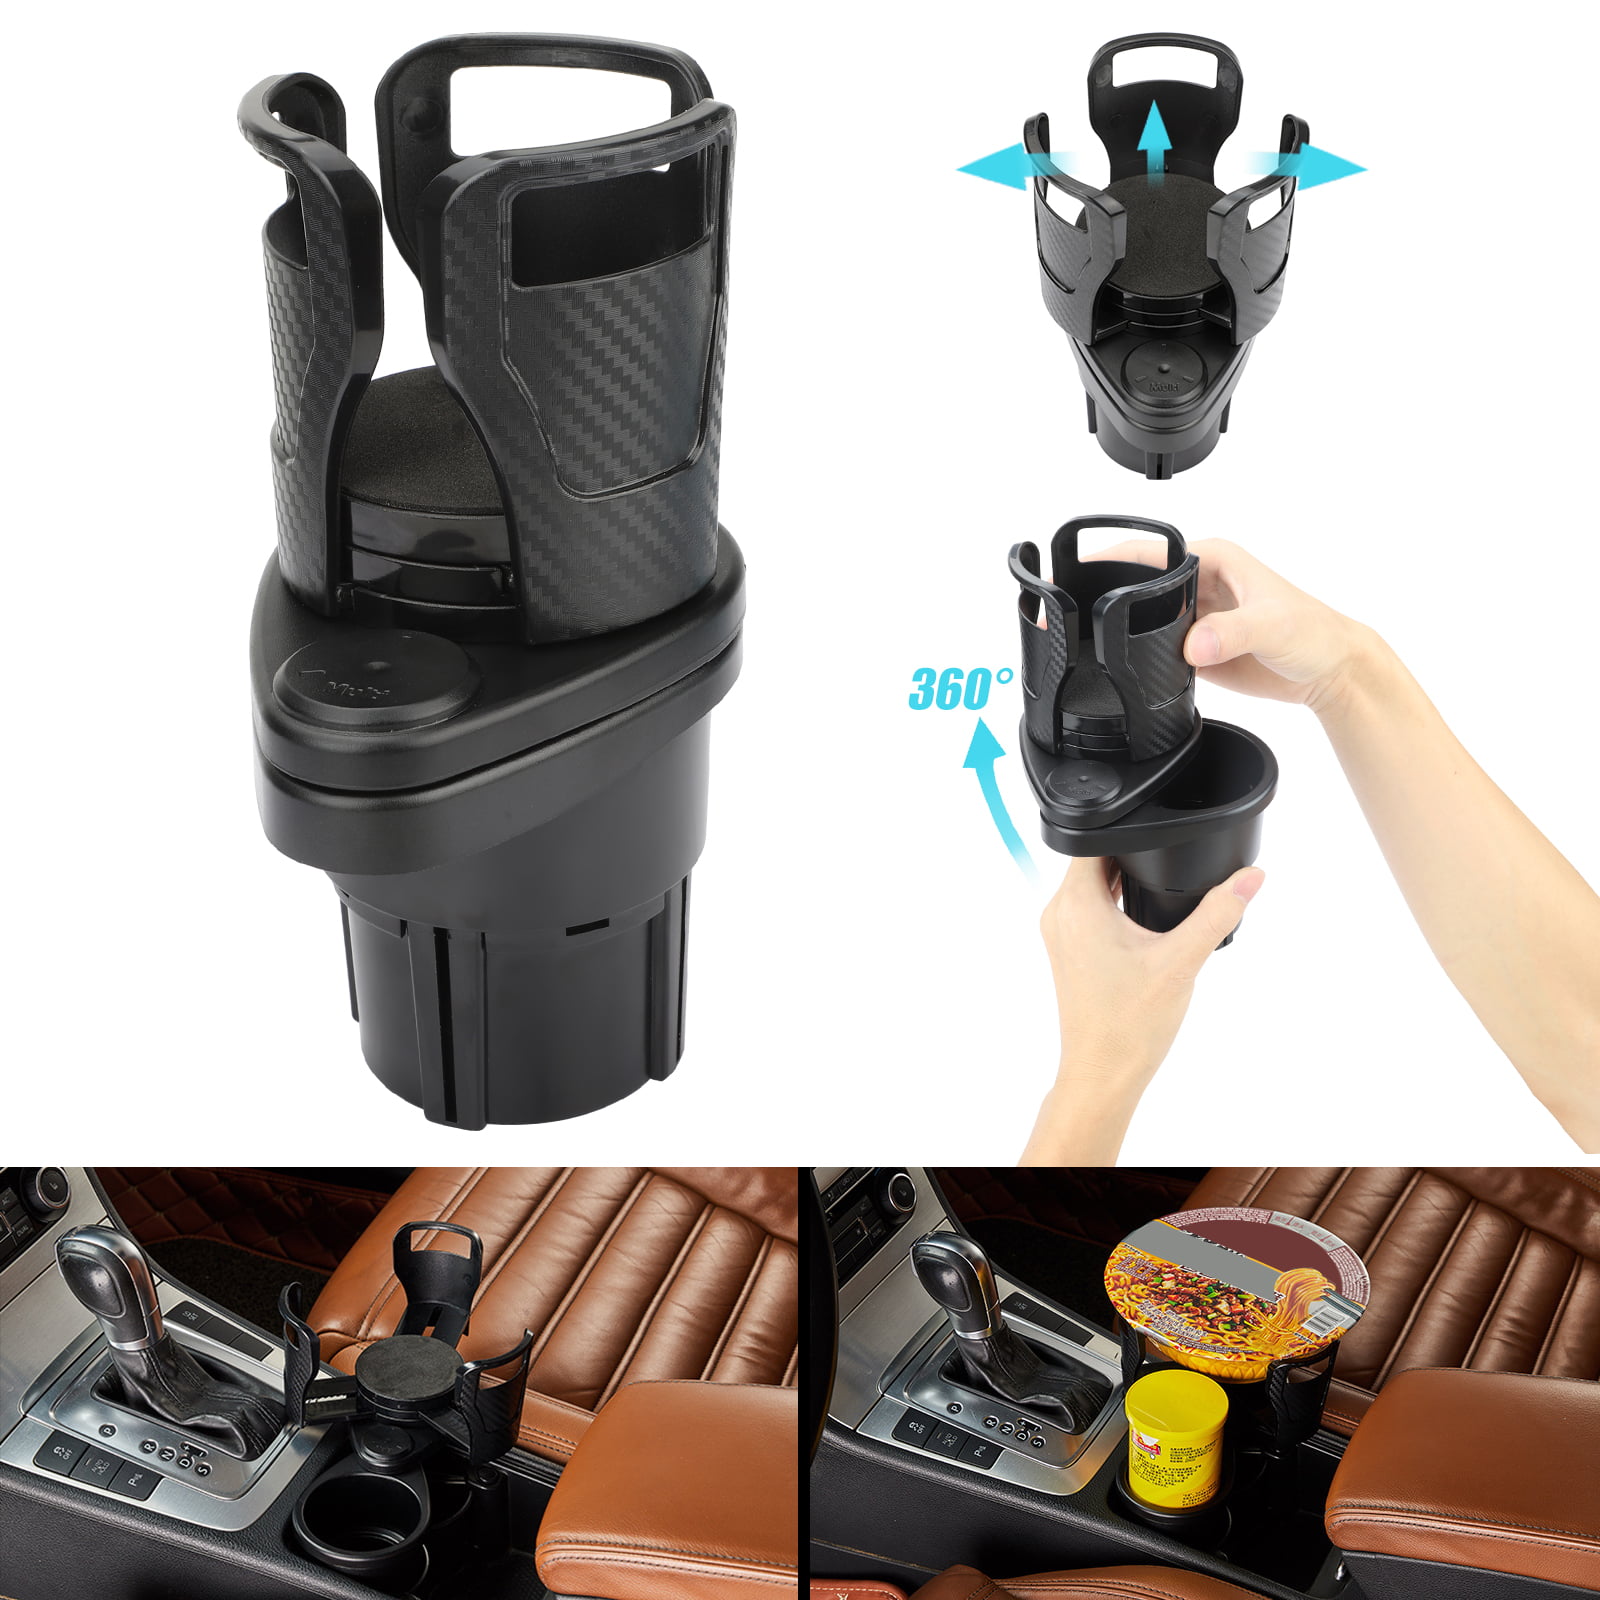 Car Center Console Dual Cup Holder Expander for Drinks 2in1 Universal Car Seat Cup Holder Drink Bottle Beverage Organizer Auto Telescopic Water Bottle Drinks Container Car Car Water Cup Holder